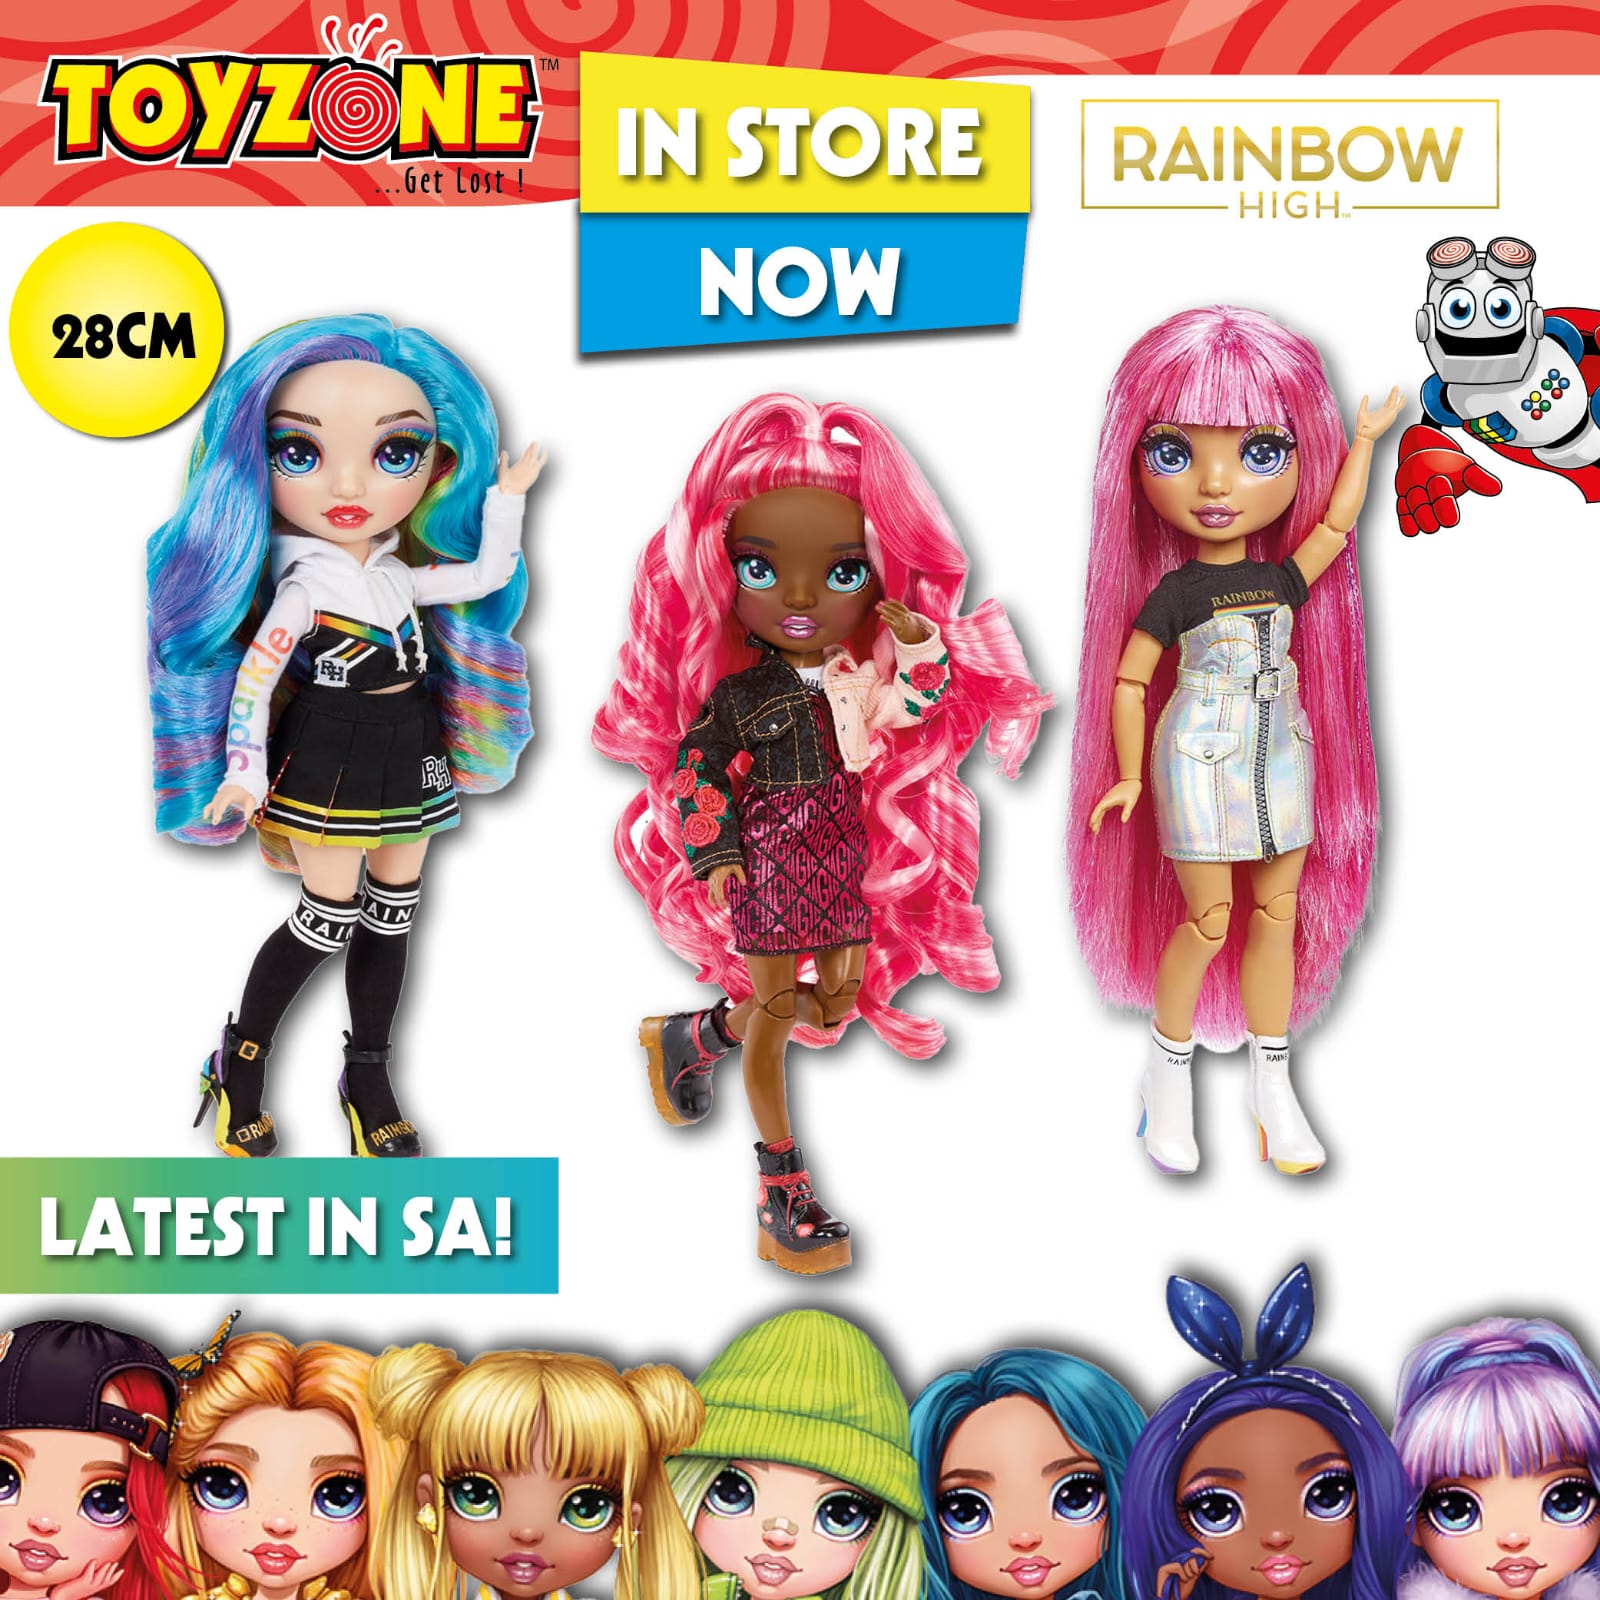 ToyZone South Africa